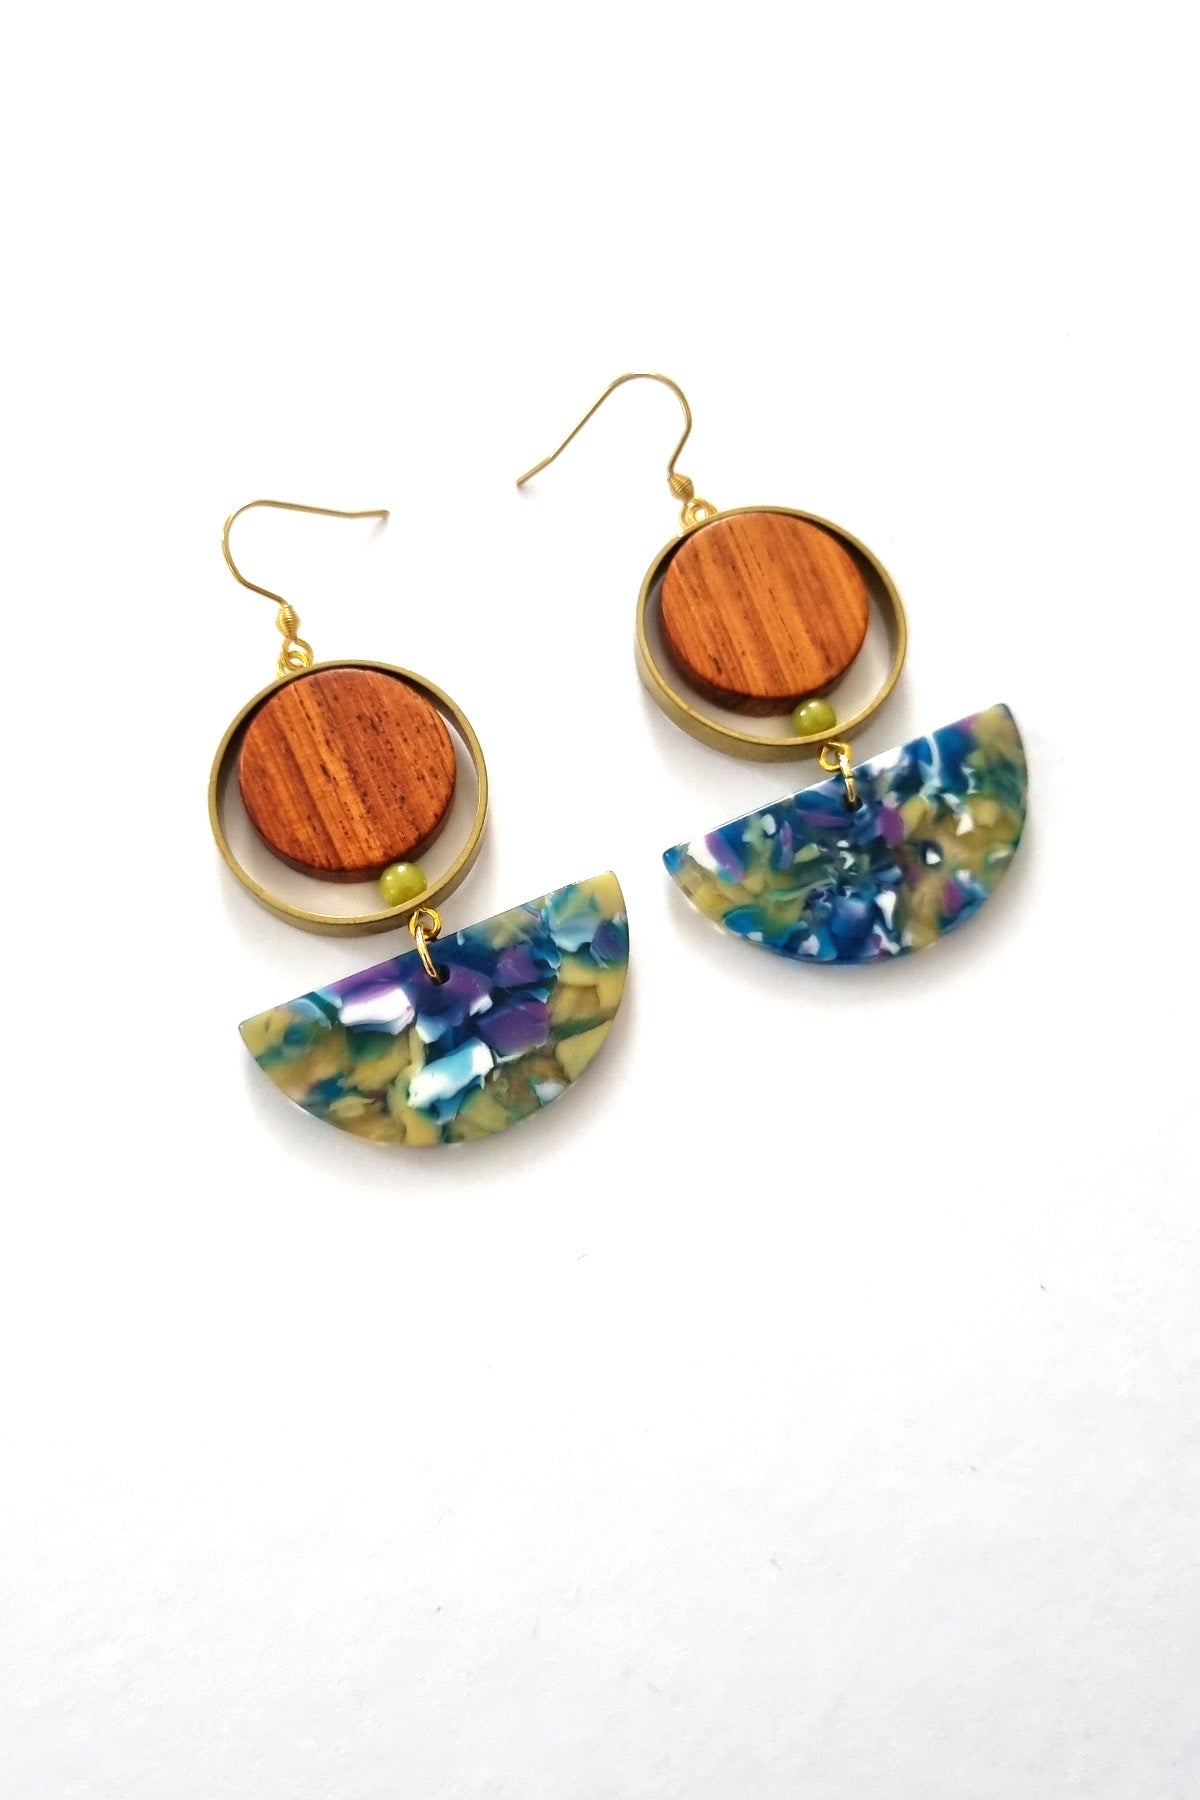 A pair of hook dangle earrings sit against a white background. They feature a circular wooden bead and a small green bead encircled by a brass ring. Below dangles a green and blue multicoloured D-shaped acrylic piece.